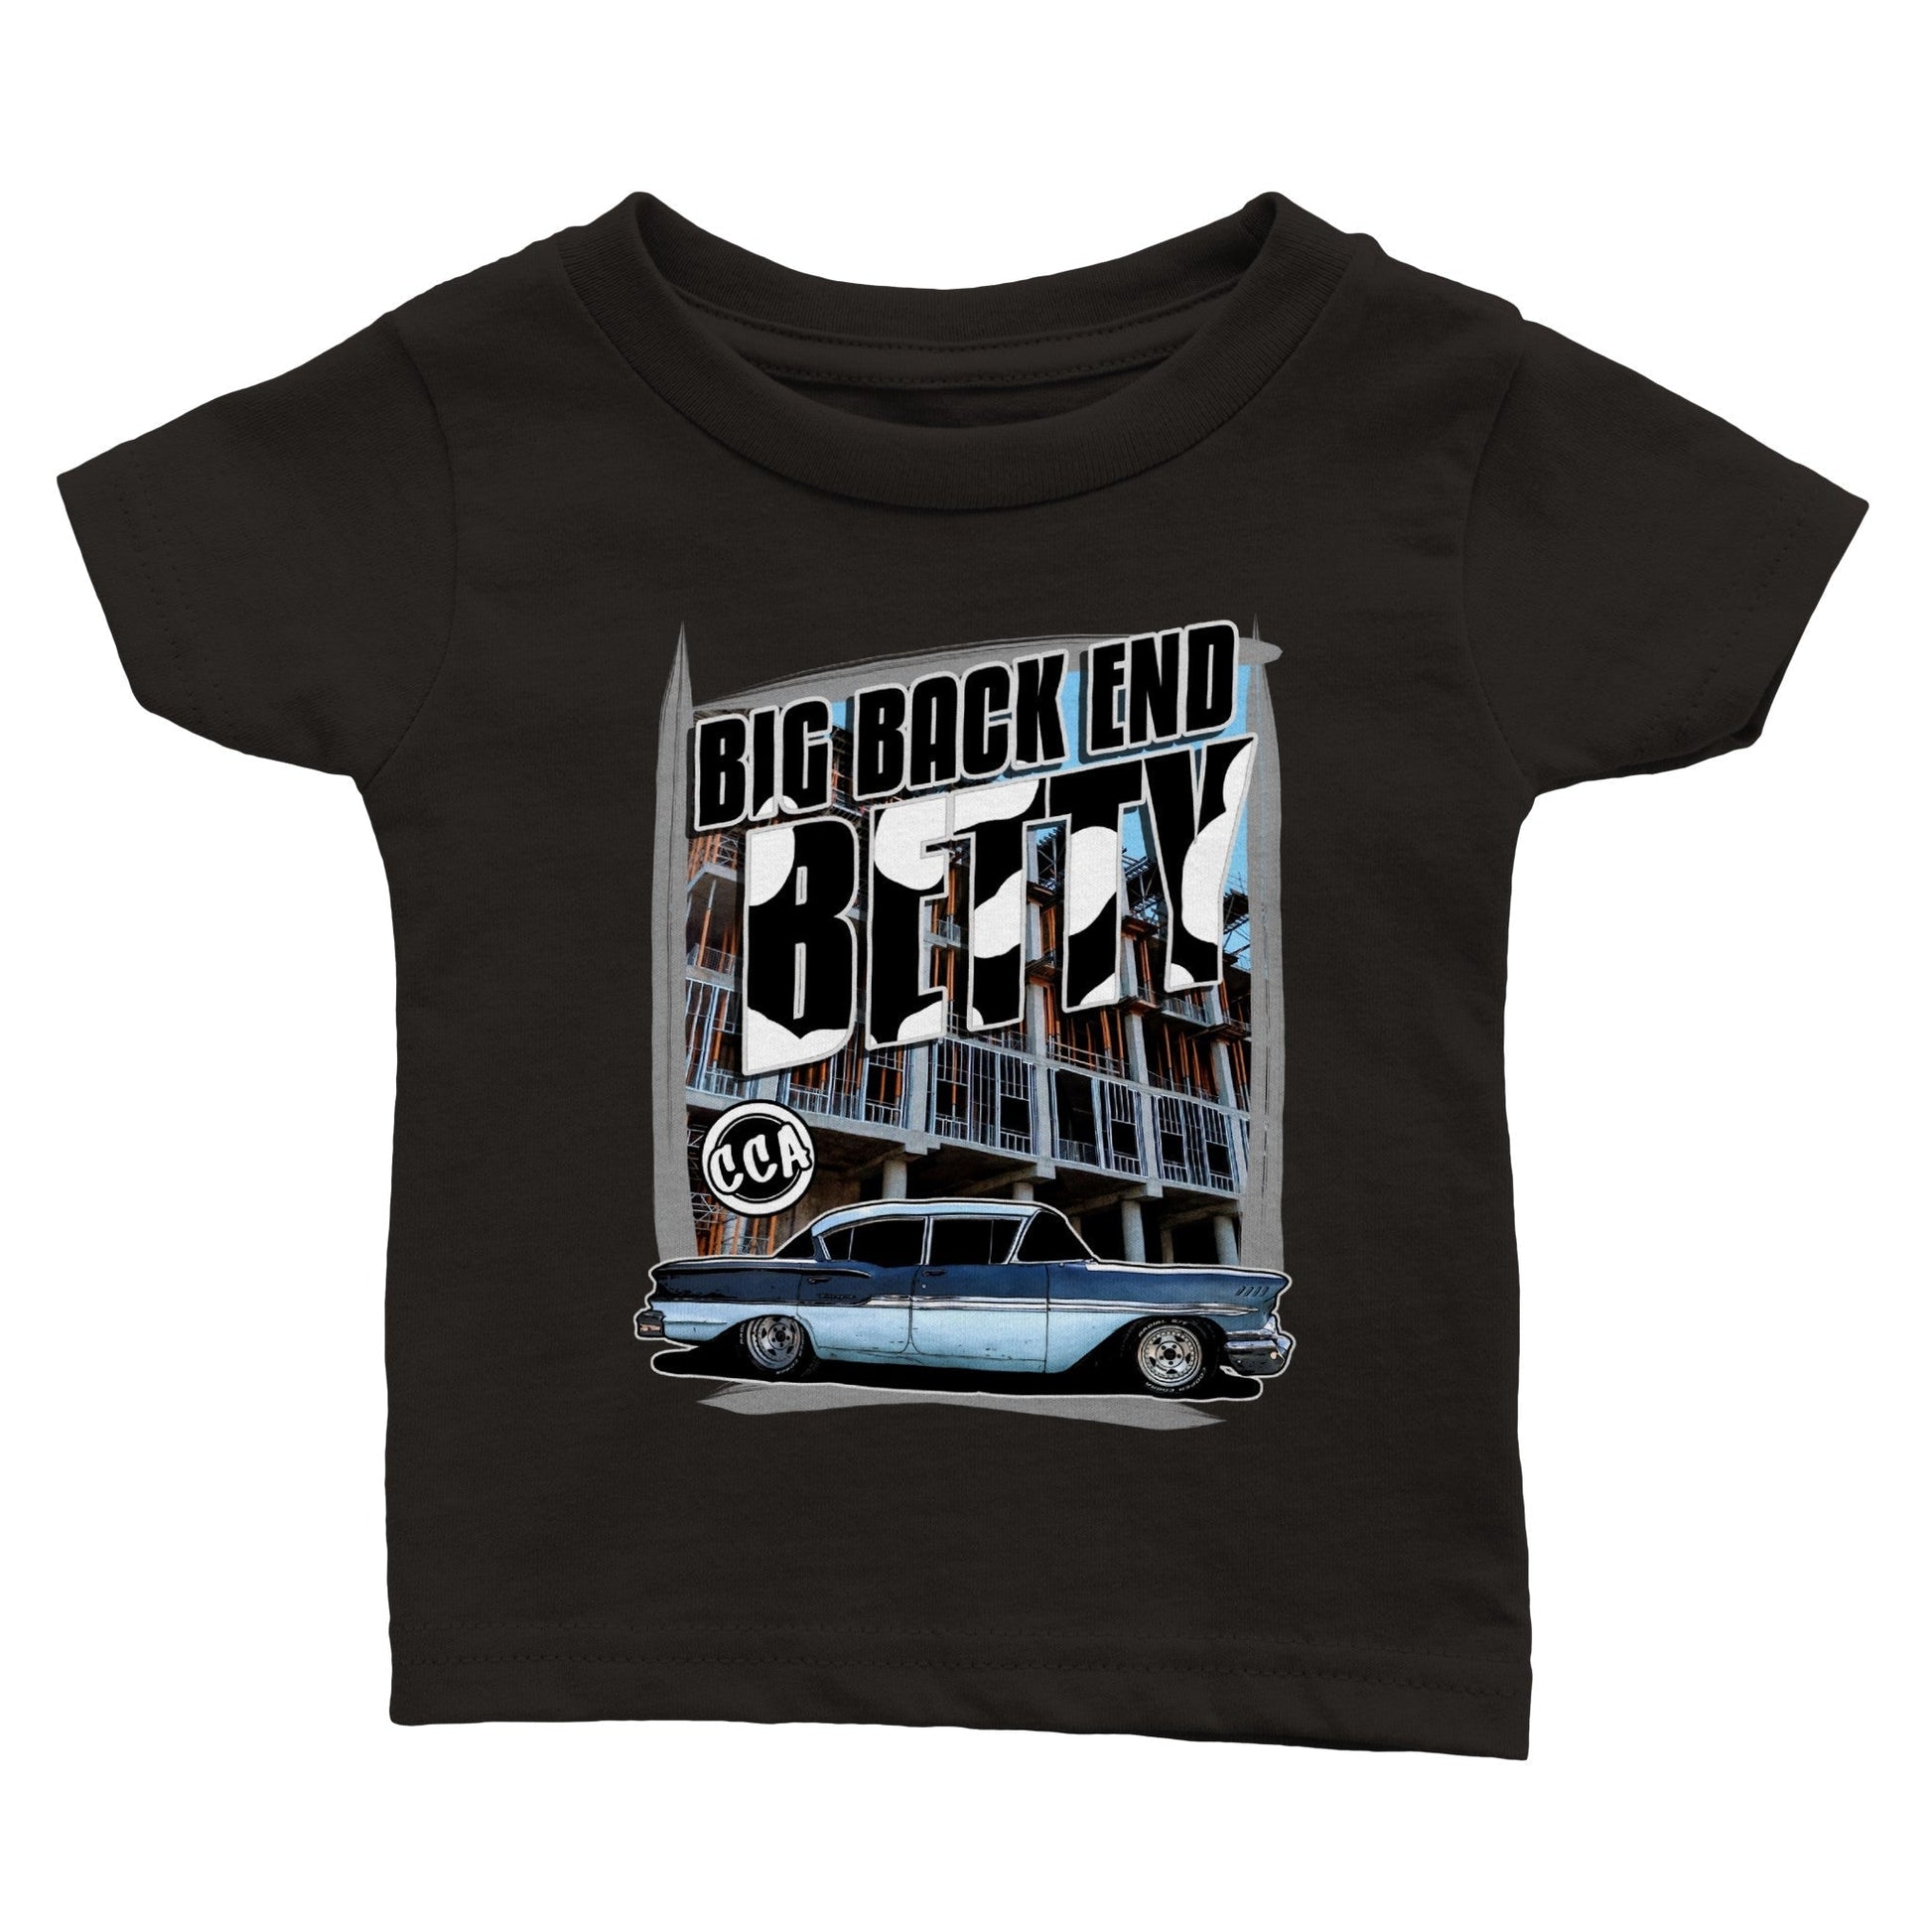 Print Material - Baby Big Back End Betty Biscayne T-shirt